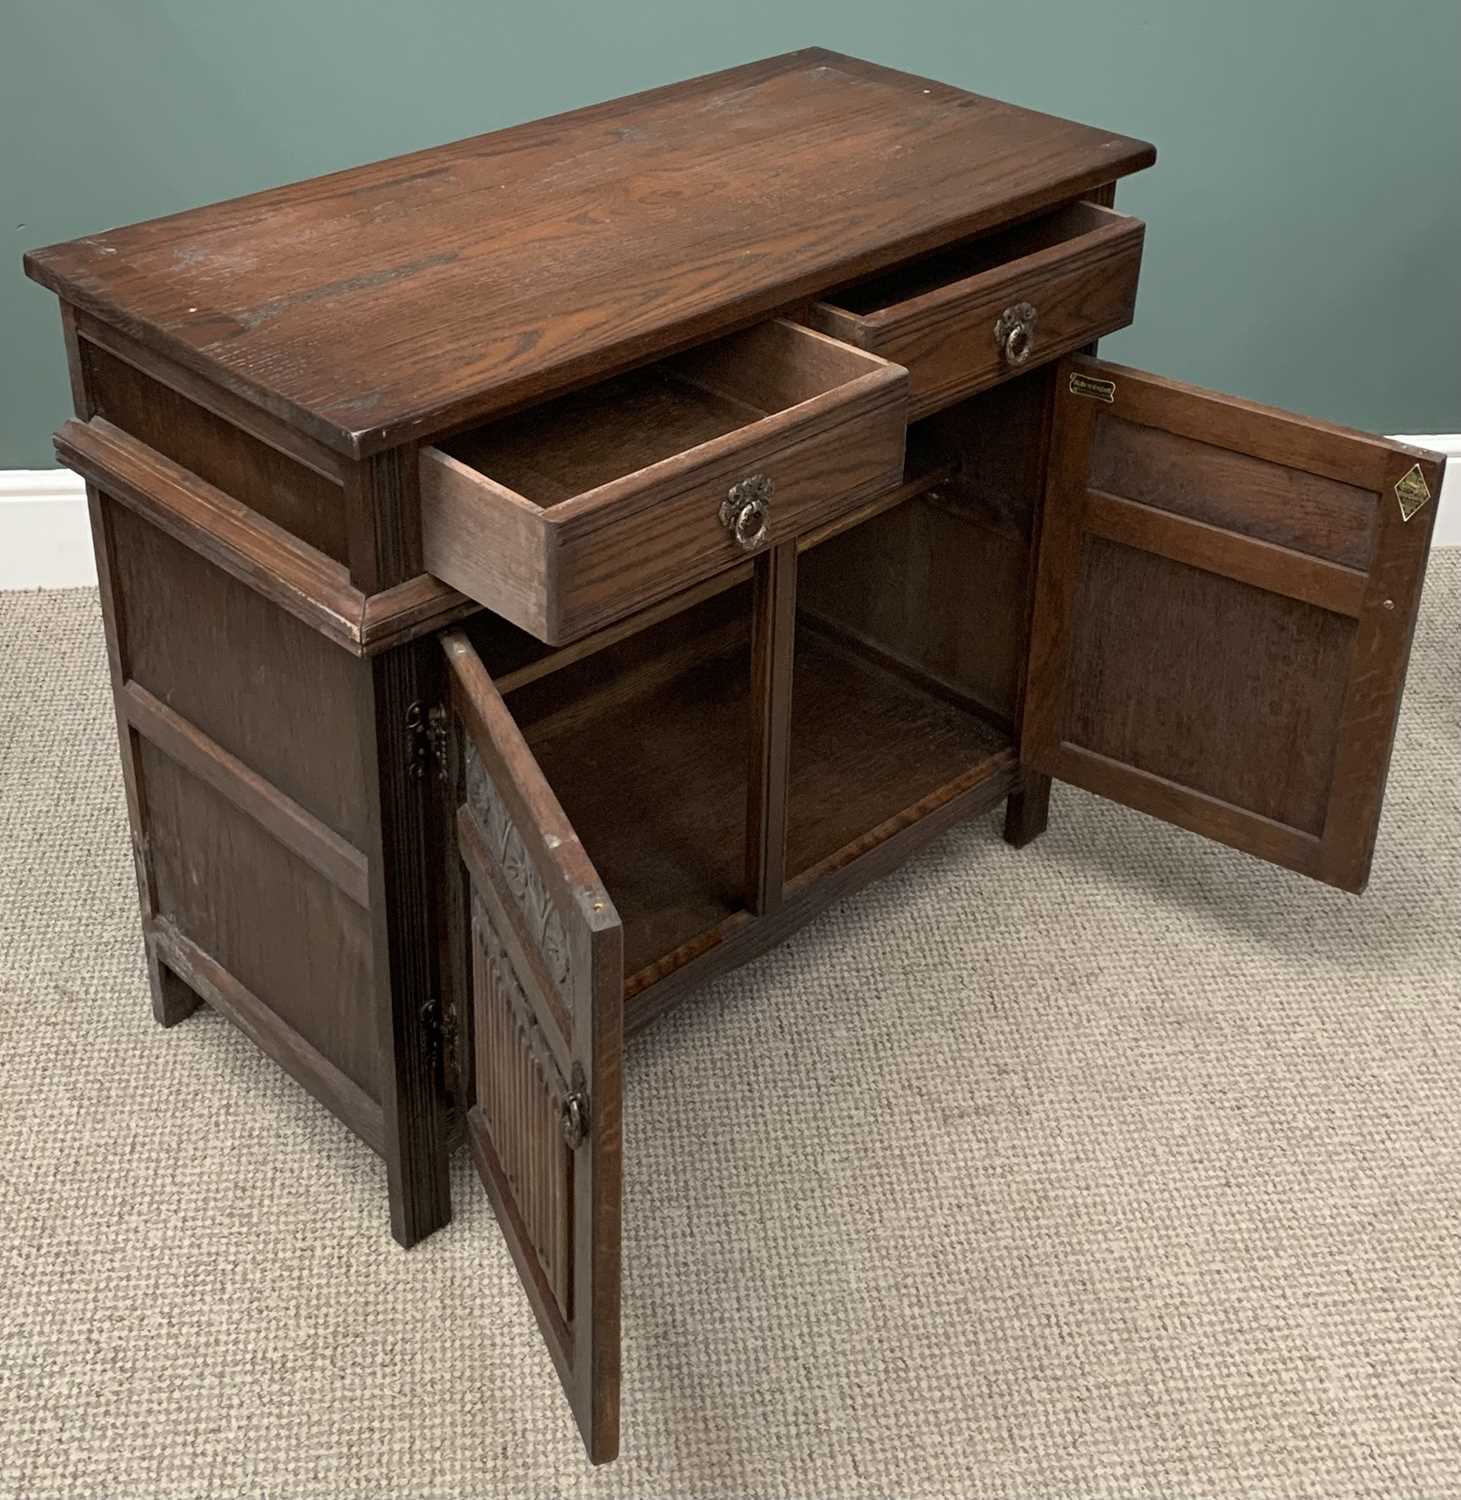 TWO ITEMS OF REPRODUCTION FURNITURE comprising oak dressing table/kneehole desk, 77 (h) x 127 (w) - Image 2 of 4